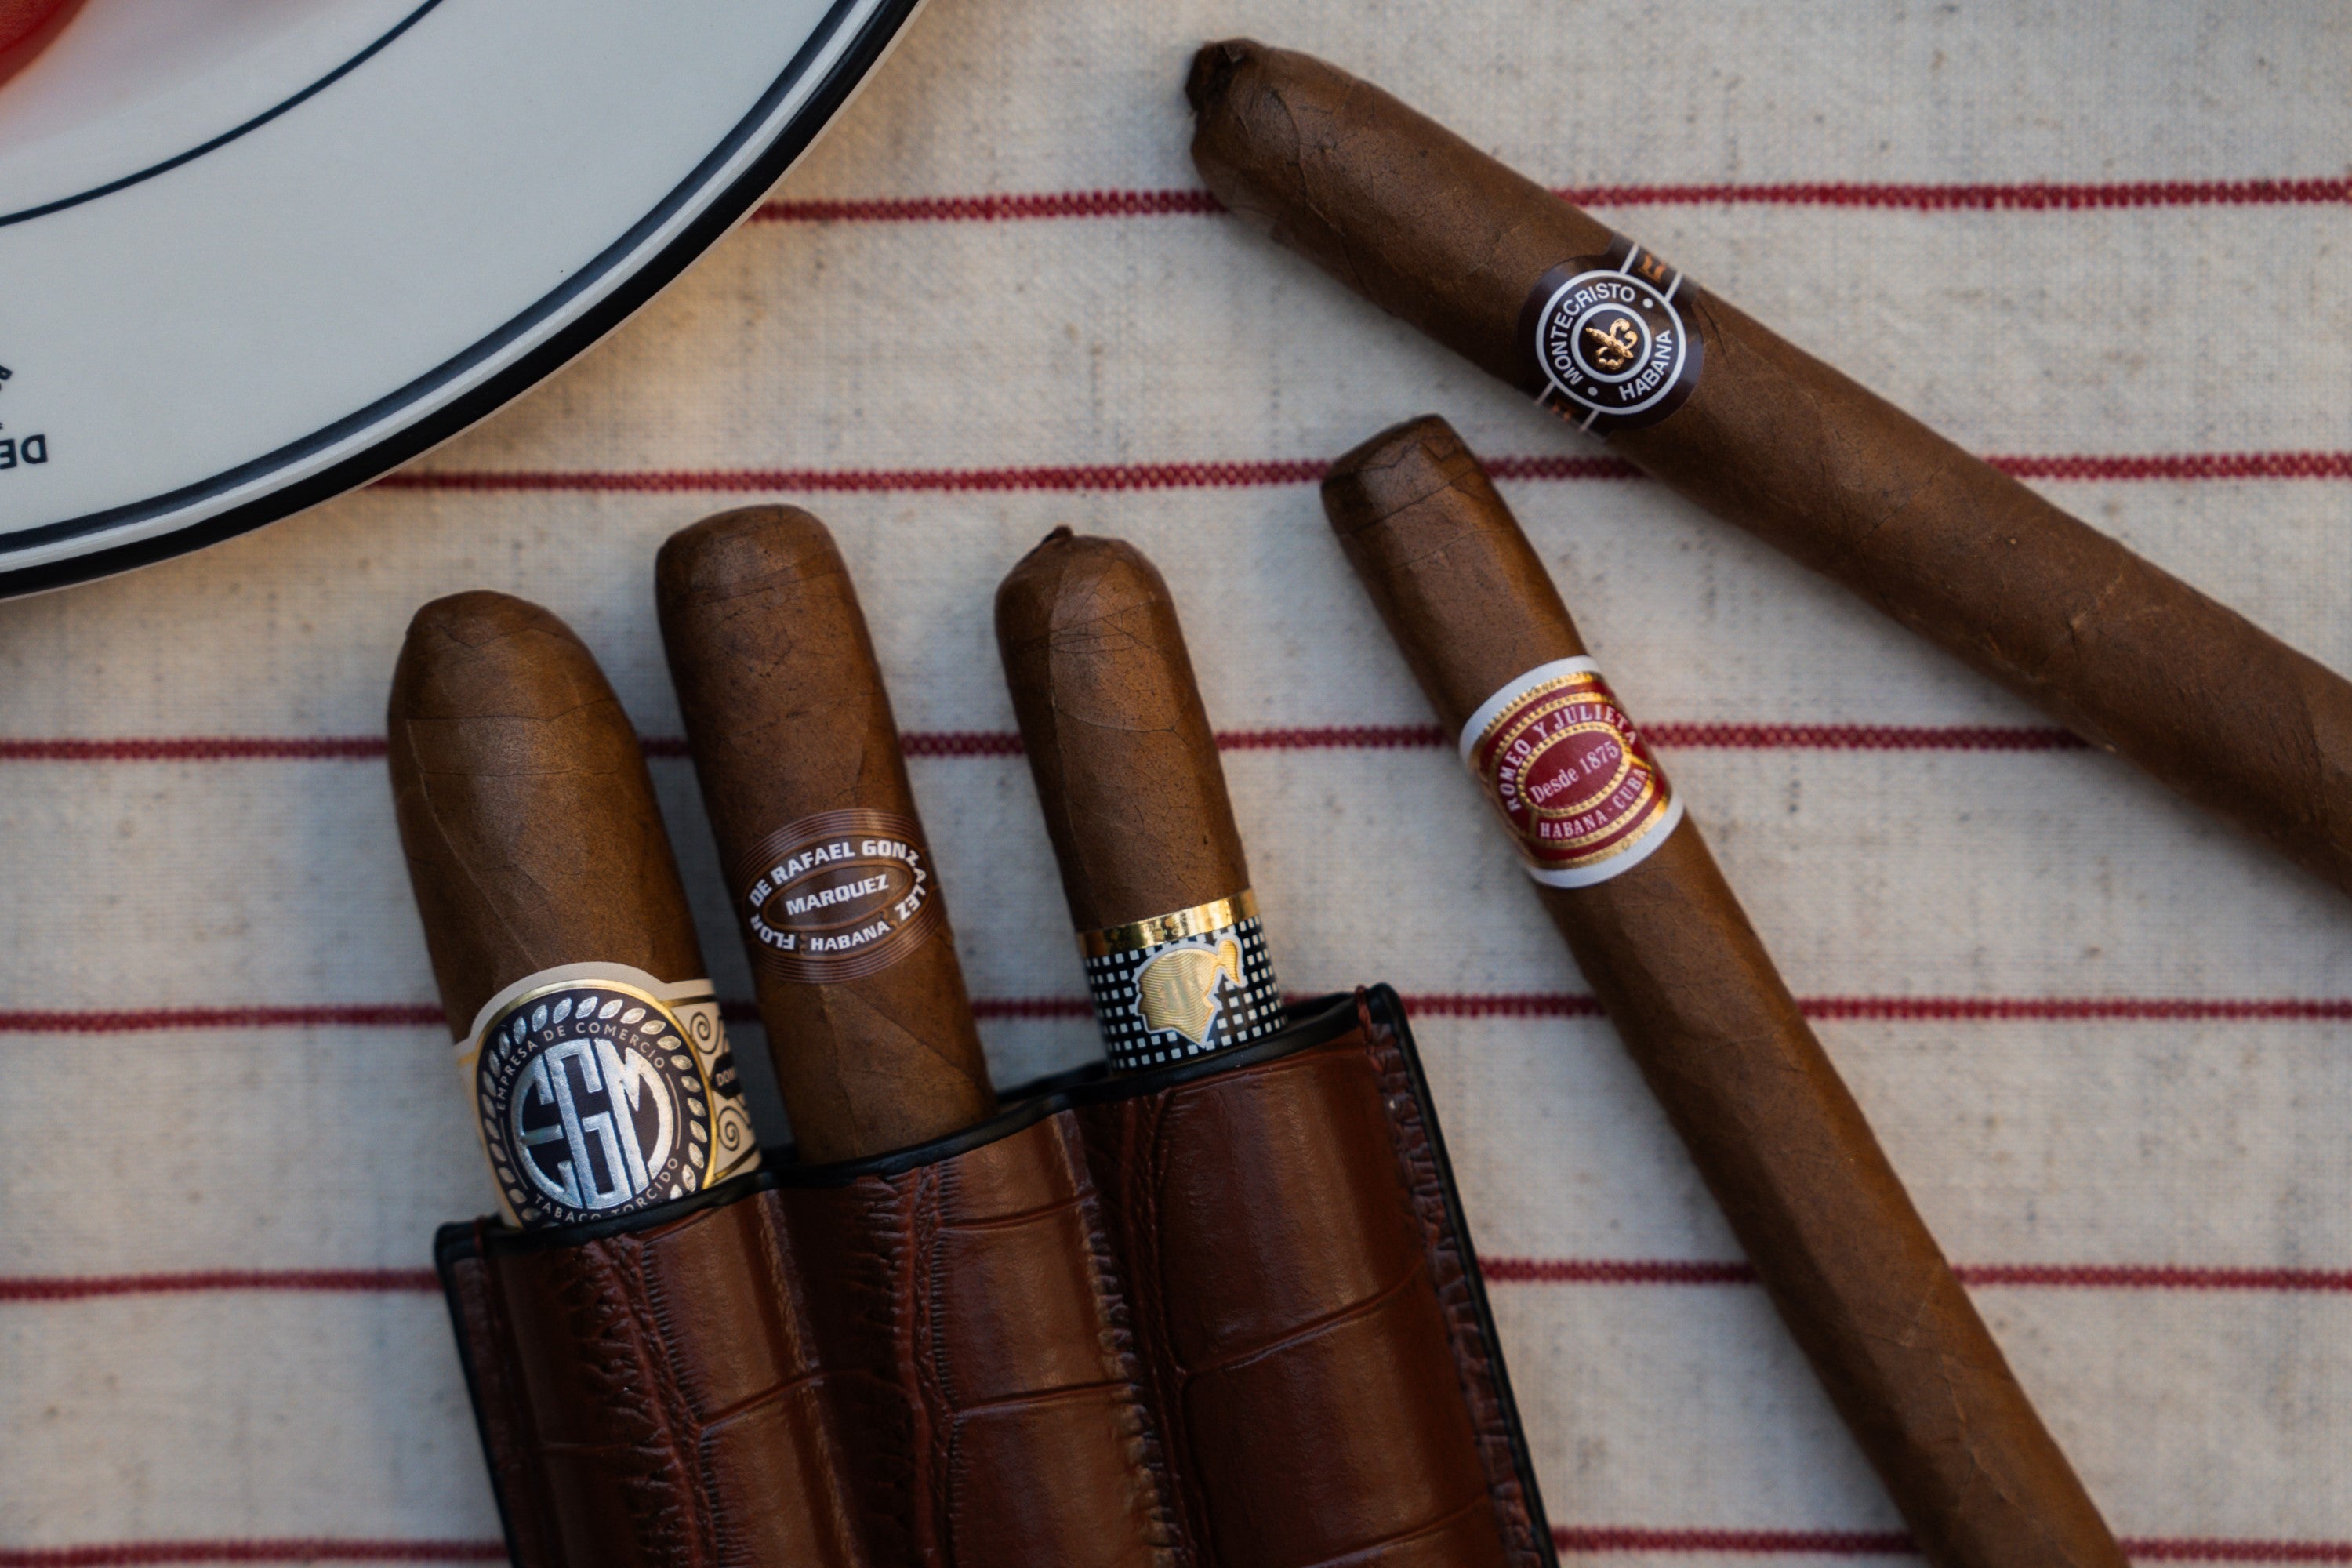 Top 5 Cigars For Aperitivo